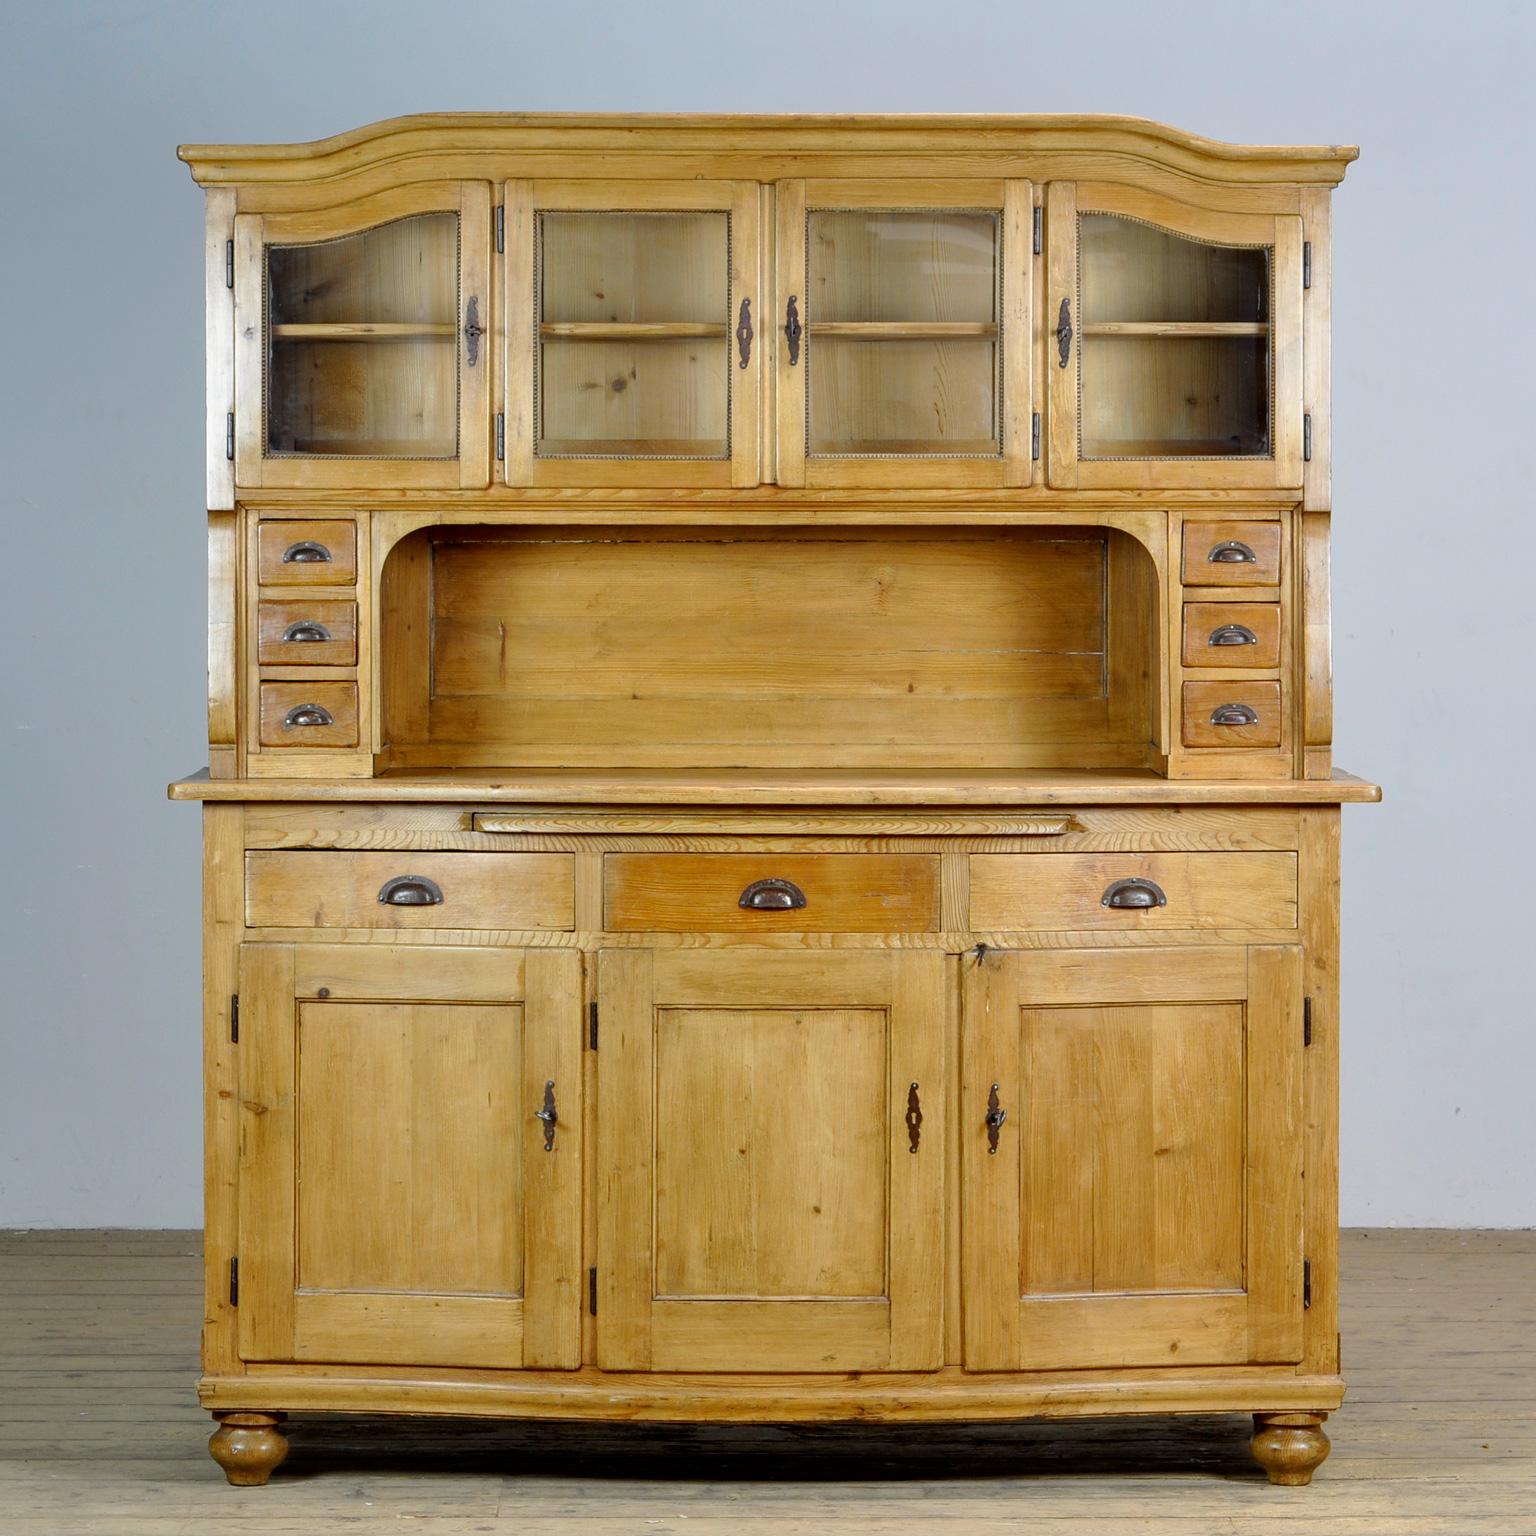 Antique German solid pine bread cabinet from circa 1925. The cabinet has a curved front with an extendable shelf for cutting bread. Lots of storage space behind the 7 doors. Assembled with dovetail joints.
The cabinet consists of two separate parts